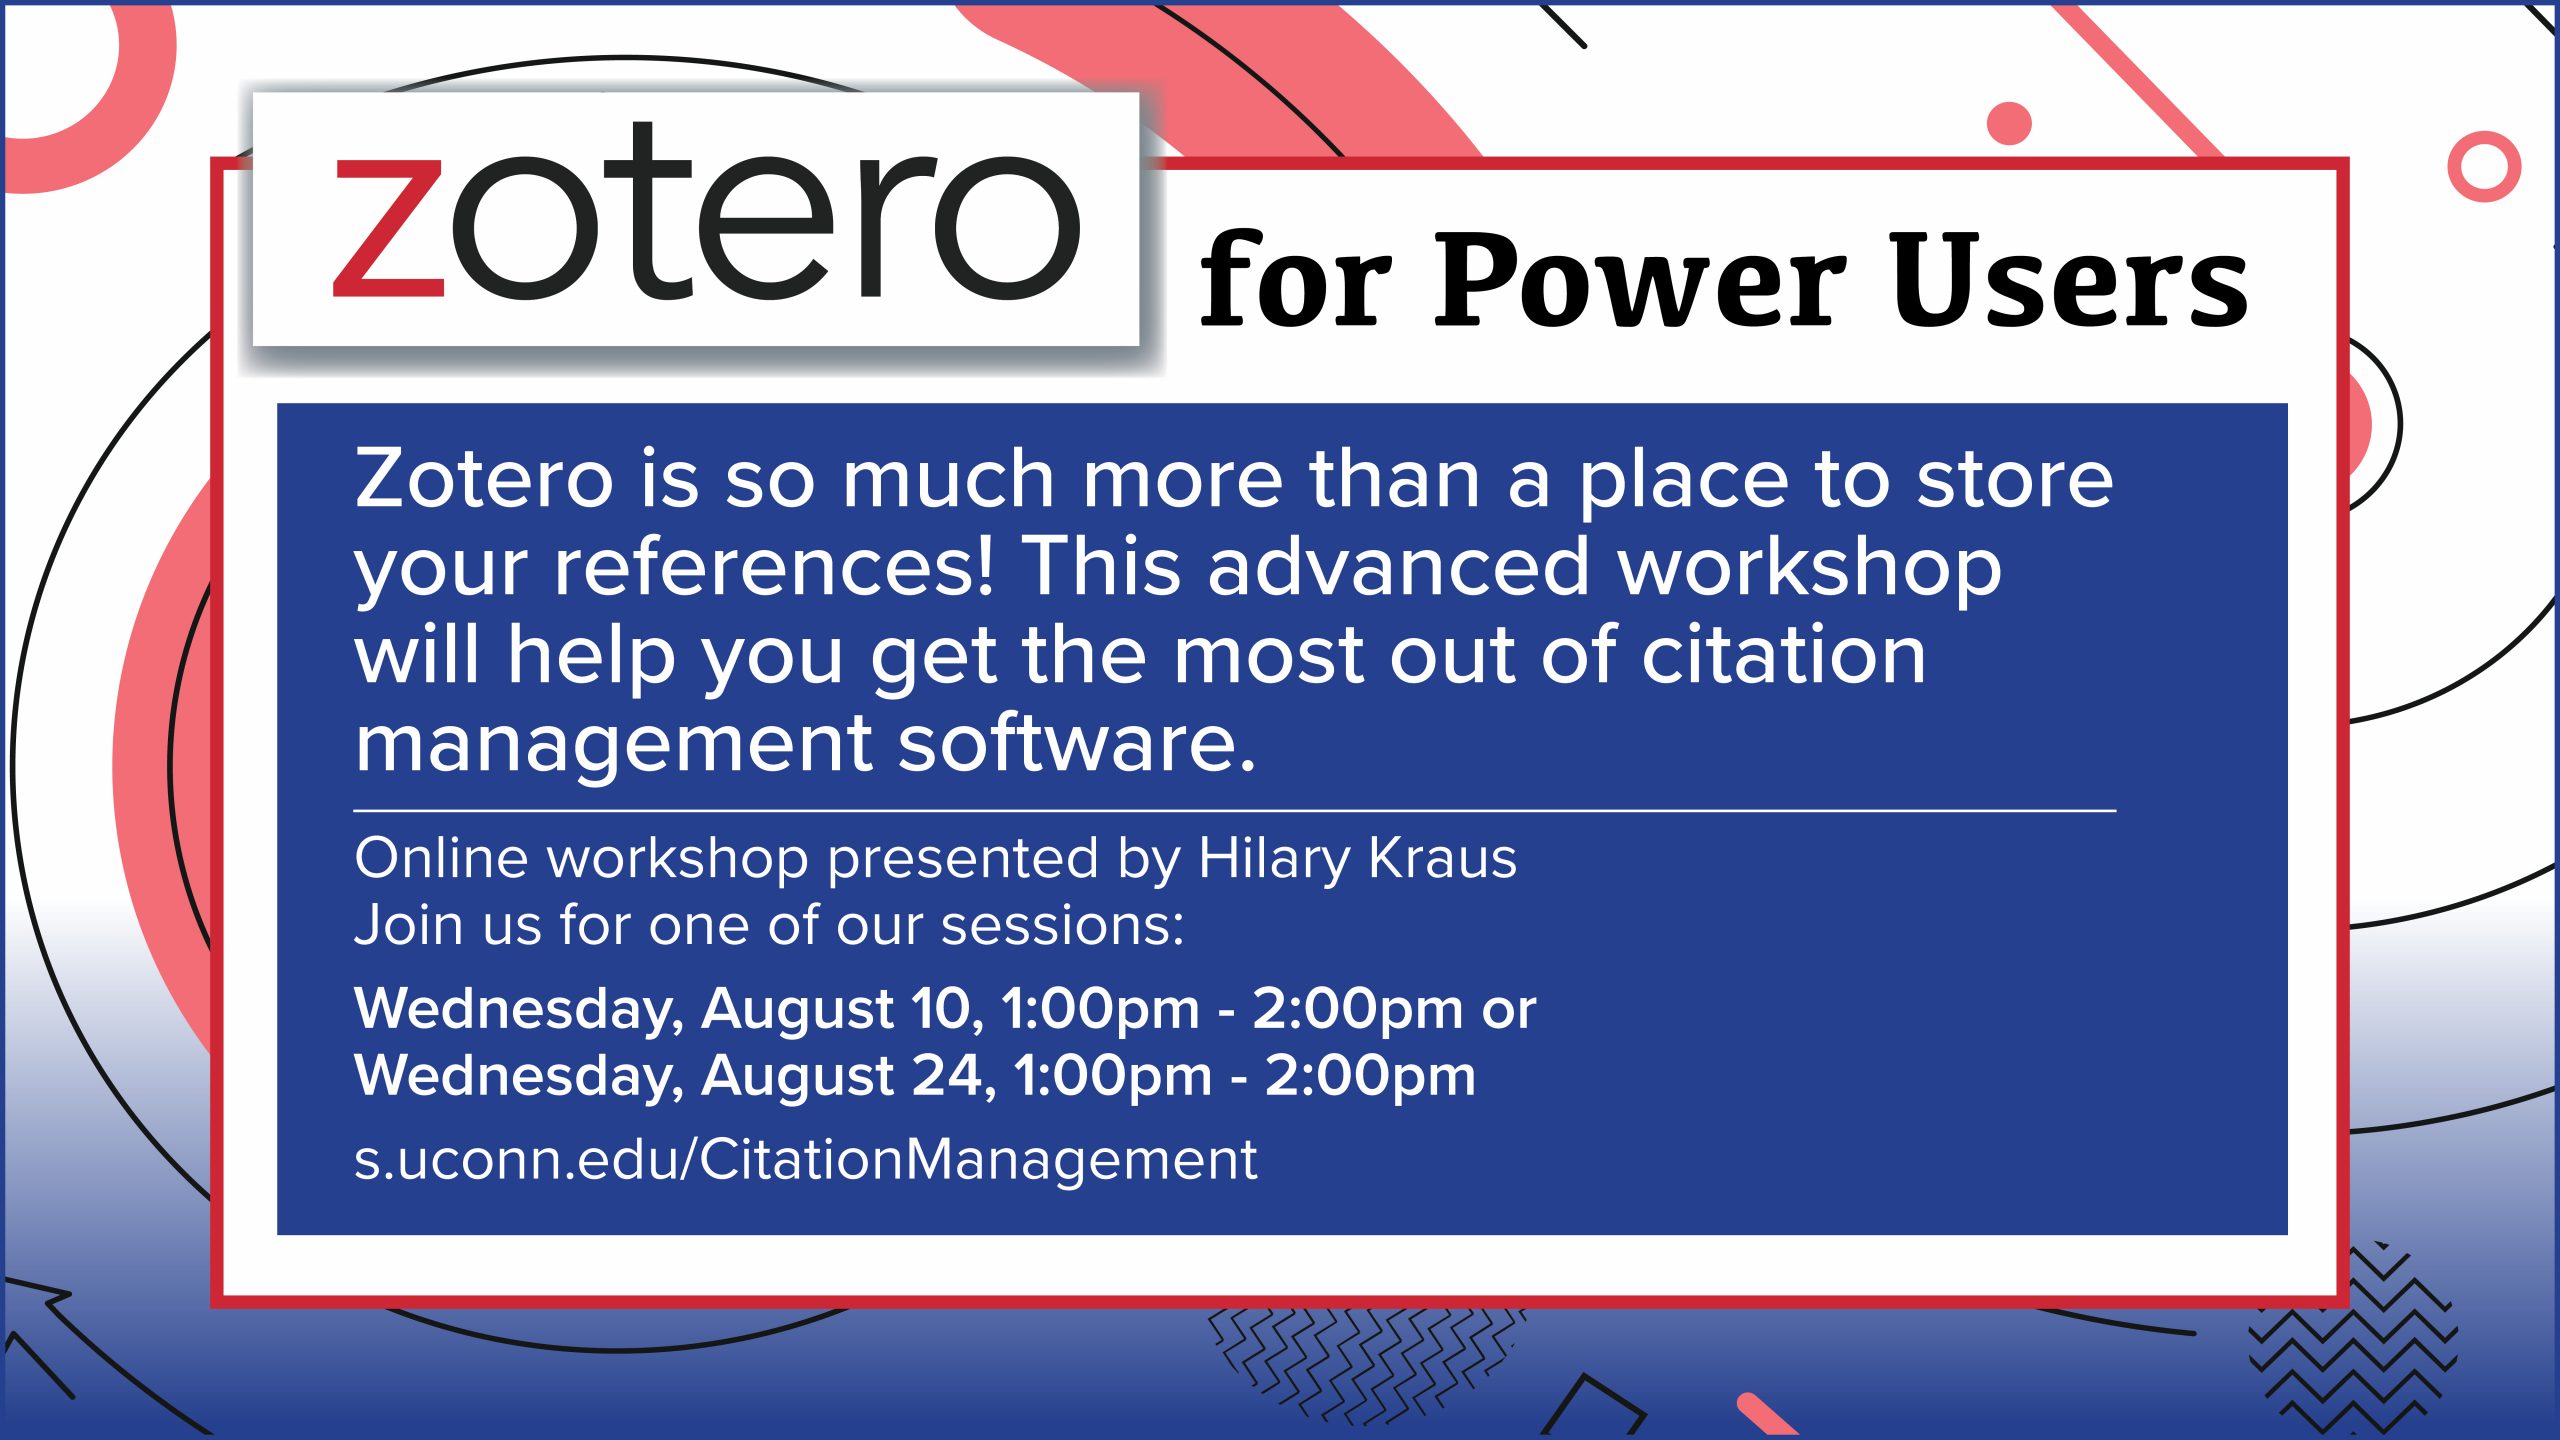 Colorful marketing screen with random geometric shapes, with the text: Zotero for Power Users Zotero is so much more than a place to store your references! This advanced workshop will help you get the most out of citation management software. Online workshop presented by Hilary Kraus Join us for one of our sessions Wednesday, August 10, 1:00pm - 2:00pm or Wednesday, August 24, 1:00pm - 2:00pm s.uconn.edu/CitationManagement